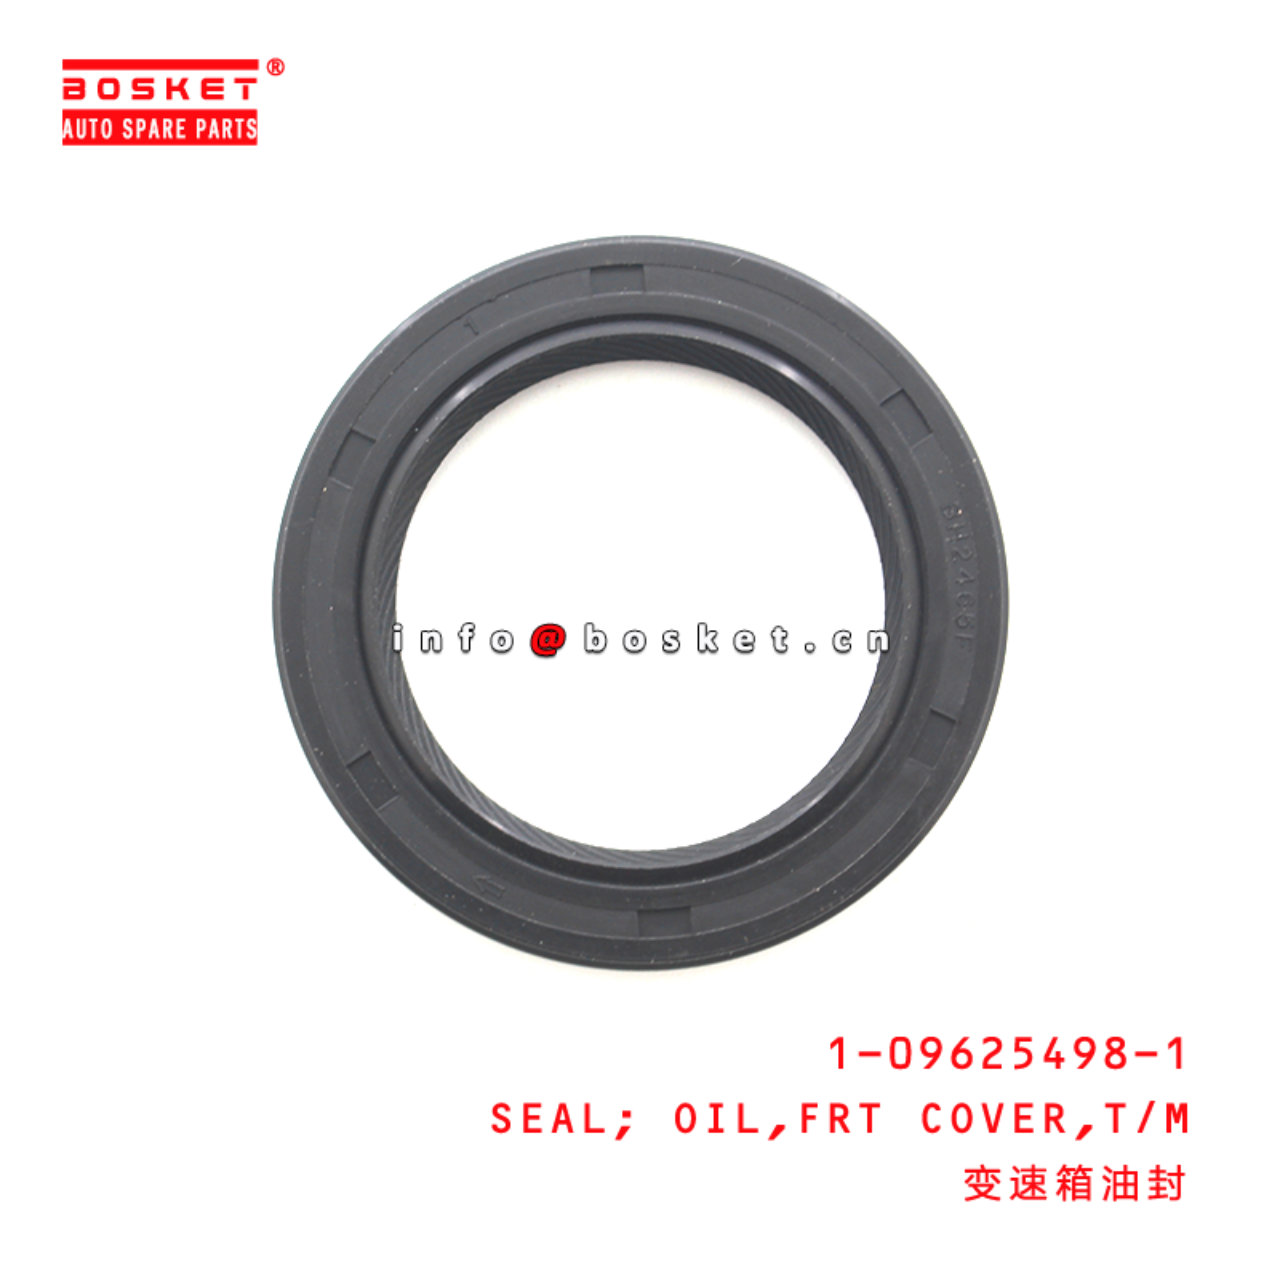 1-09625498-1 Transmission Front Cover Oil Seal Suitable for ISUZU FVR33 6HH1 1096254981